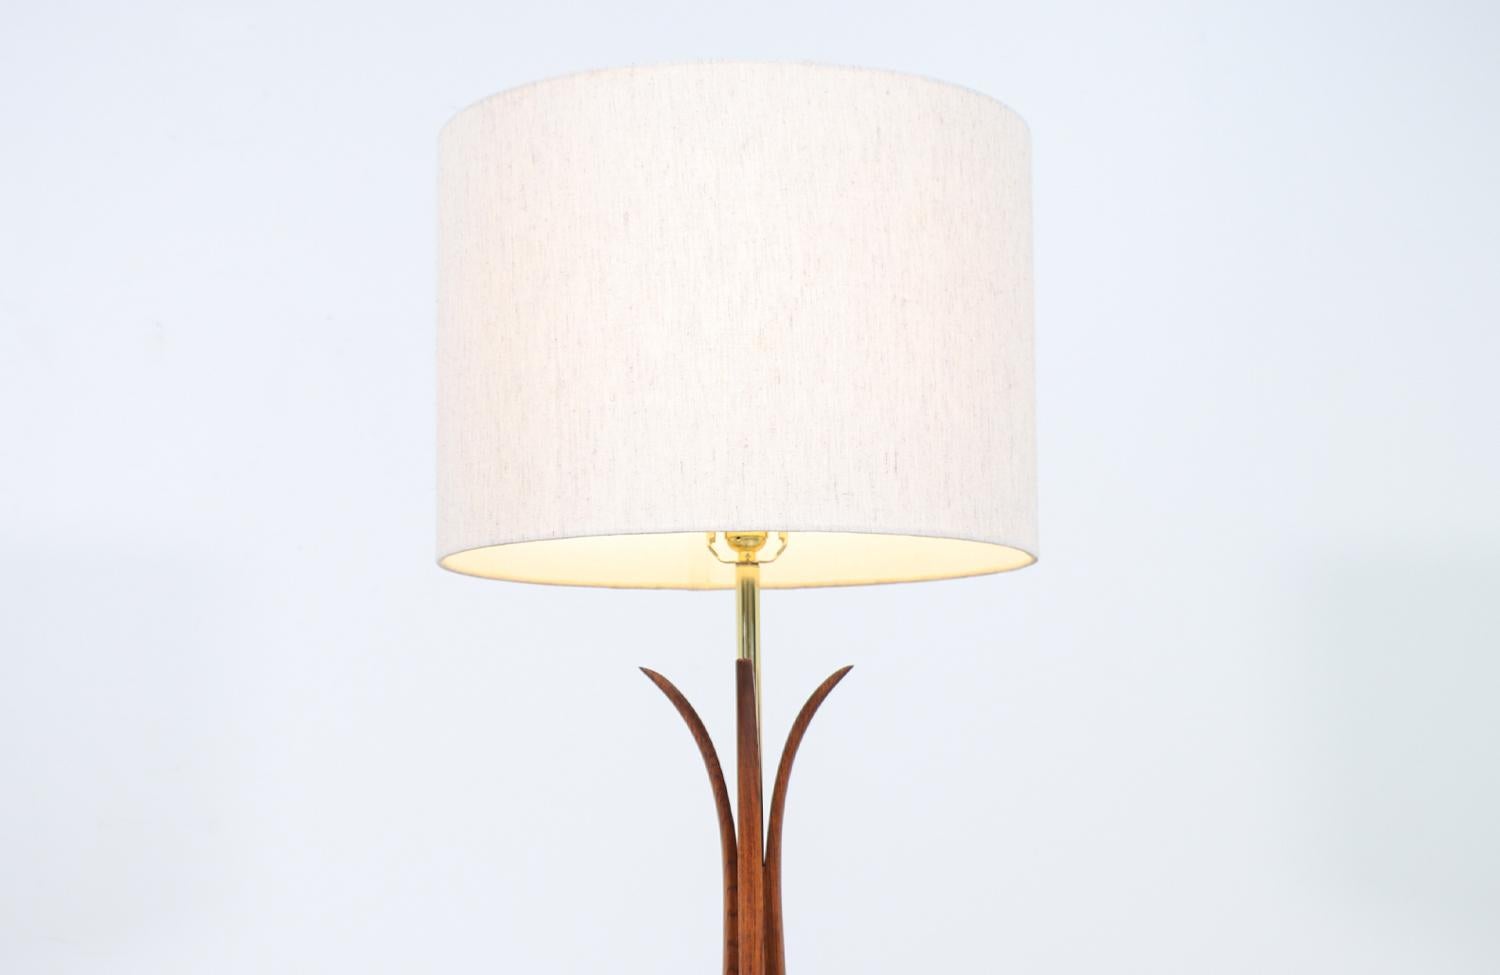 Polished Mid-Century Modern Sculpted Walnut Floor Lamp with Brass Accents